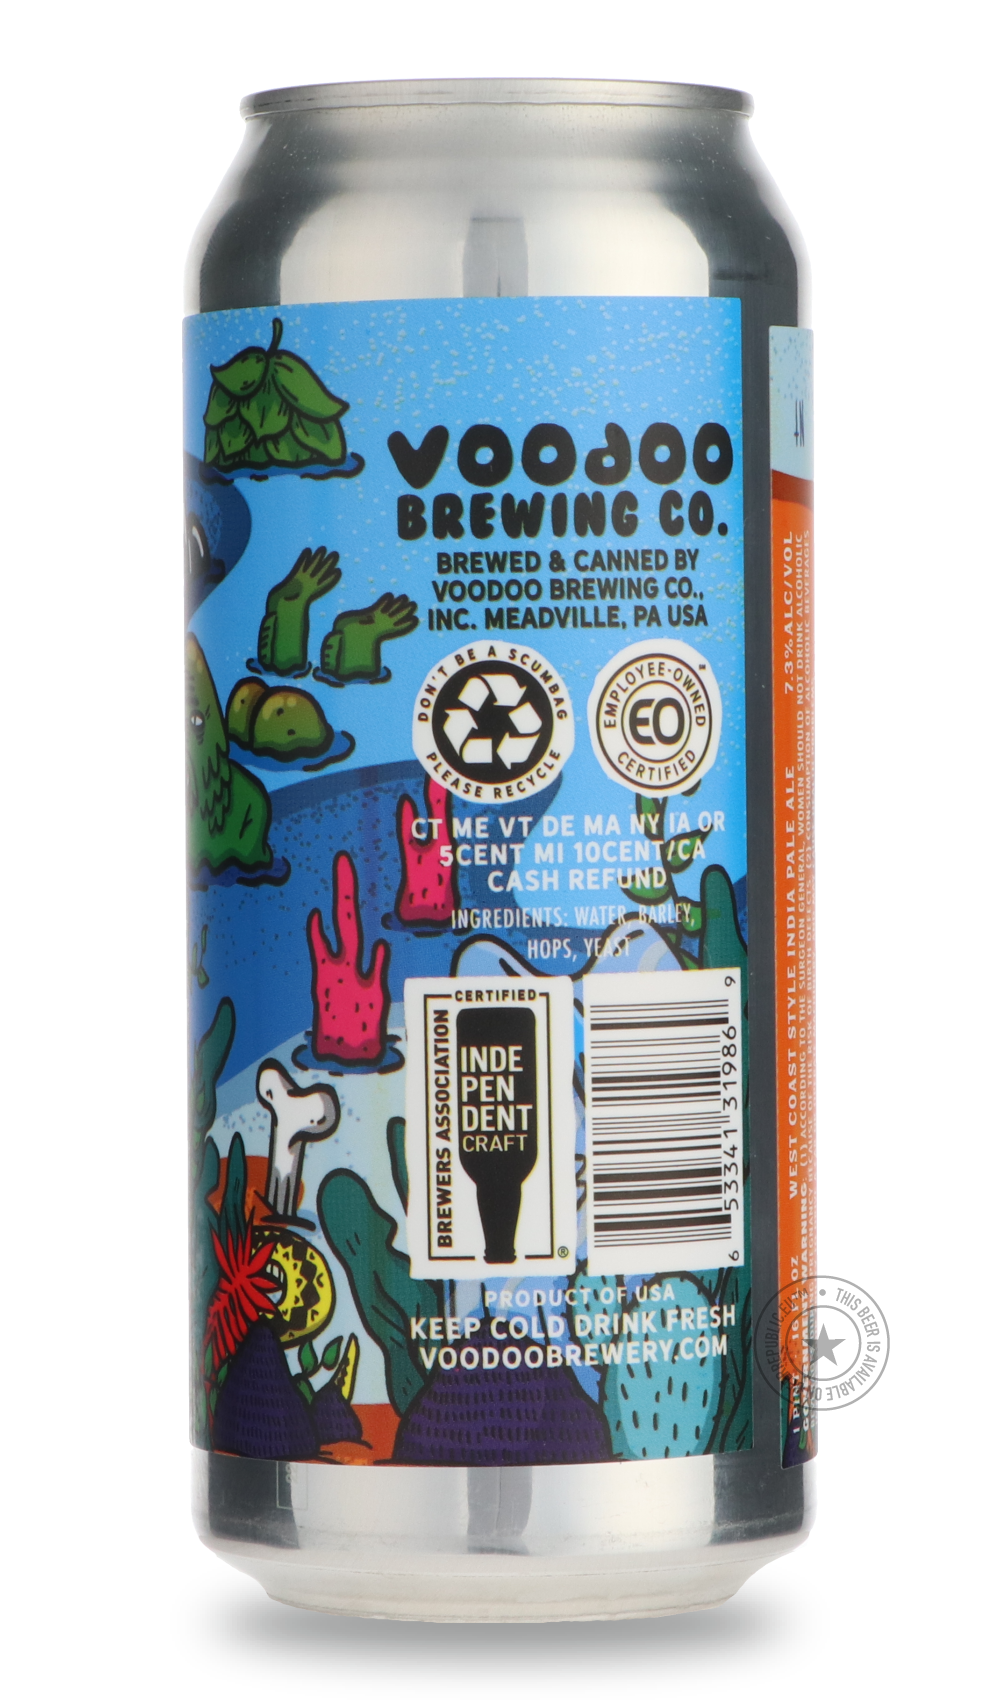 -Voodoo- Good Vibes-IPA- Only @ Beer Republic - The best online beer store for American & Canadian craft beer - Buy beer online from the USA and Canada - Bier online kopen - Amerikaans bier kopen - Craft beer store - Craft beer kopen - Amerikanisch bier kaufen - Bier online kaufen - Acheter biere online - IPA - Stout - Porter - New England IPA - Hazy IPA - Imperial Stout - Barrel Aged - Barrel Aged Imperial Stout - Brown - Dark beer - Blond - Blonde - Pilsner - Lager - Wheat - Weizen - Amber - Barley Wine -